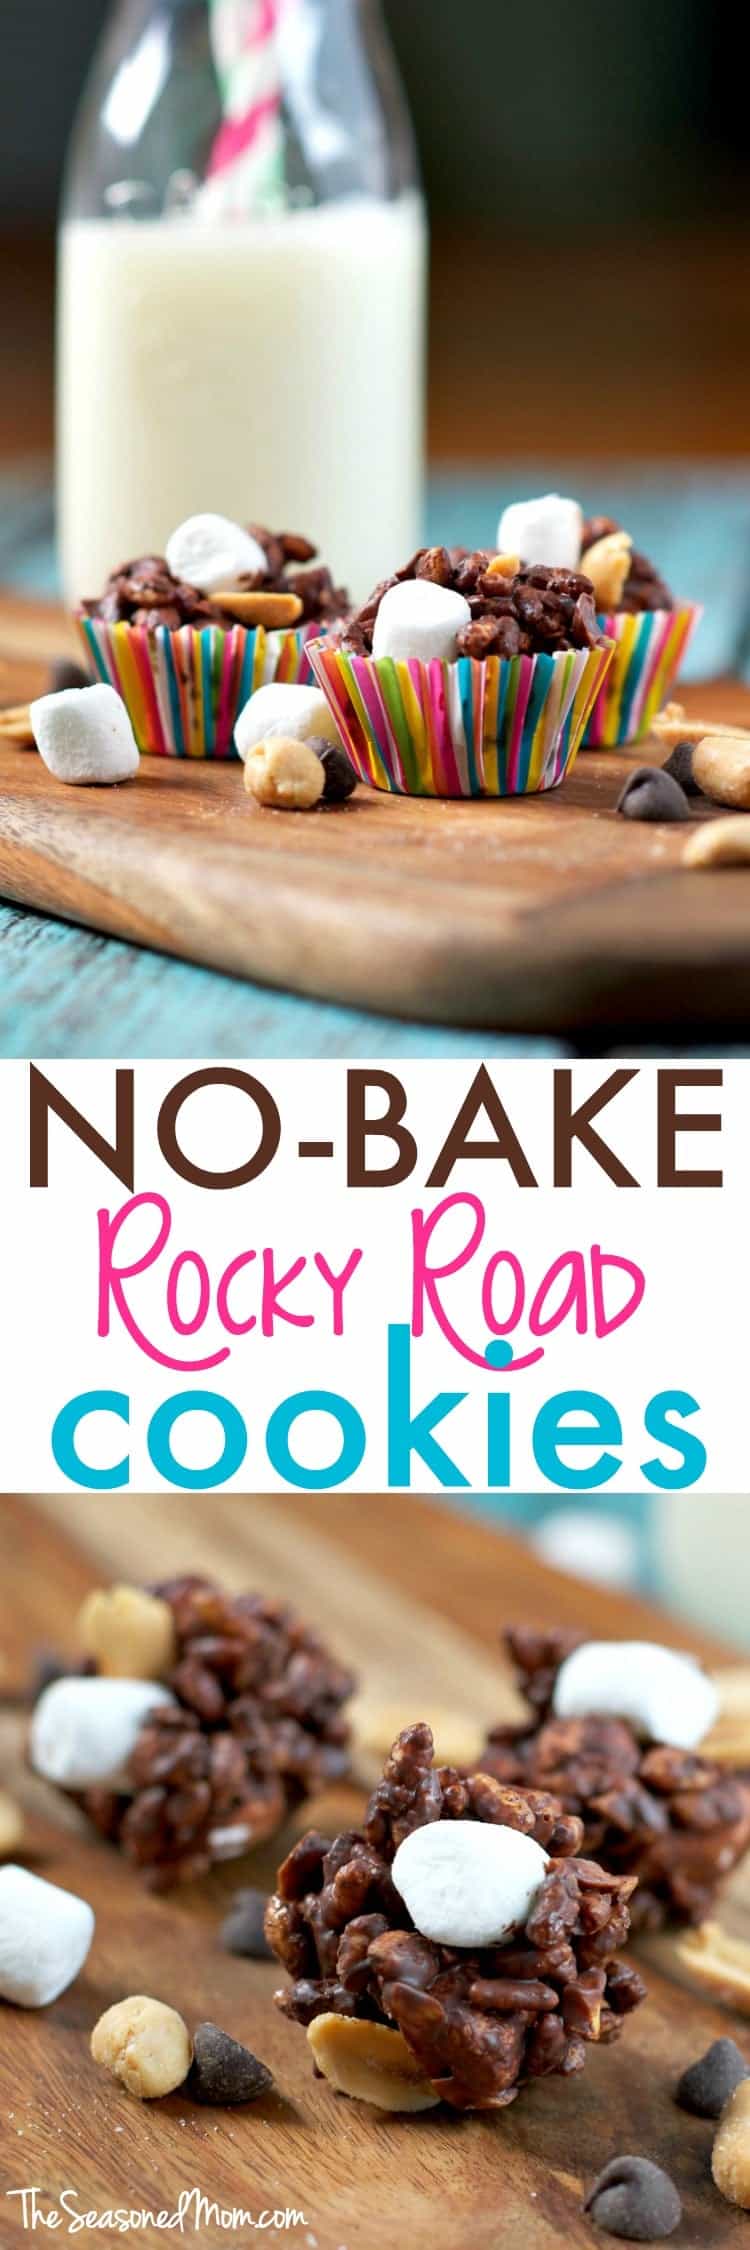 Another family favorite dessert inspired by Aunt Bee's classic recipe box, these 5-Ingredient No Bake Rocky Road Cookies are a delicious 10-minute treat to beat the heat! Loaded with chocolate, peanuts, marshmallows, and Rice Krispies, this is a simple and easy way to satisfy your taste for salty-and-sweet!